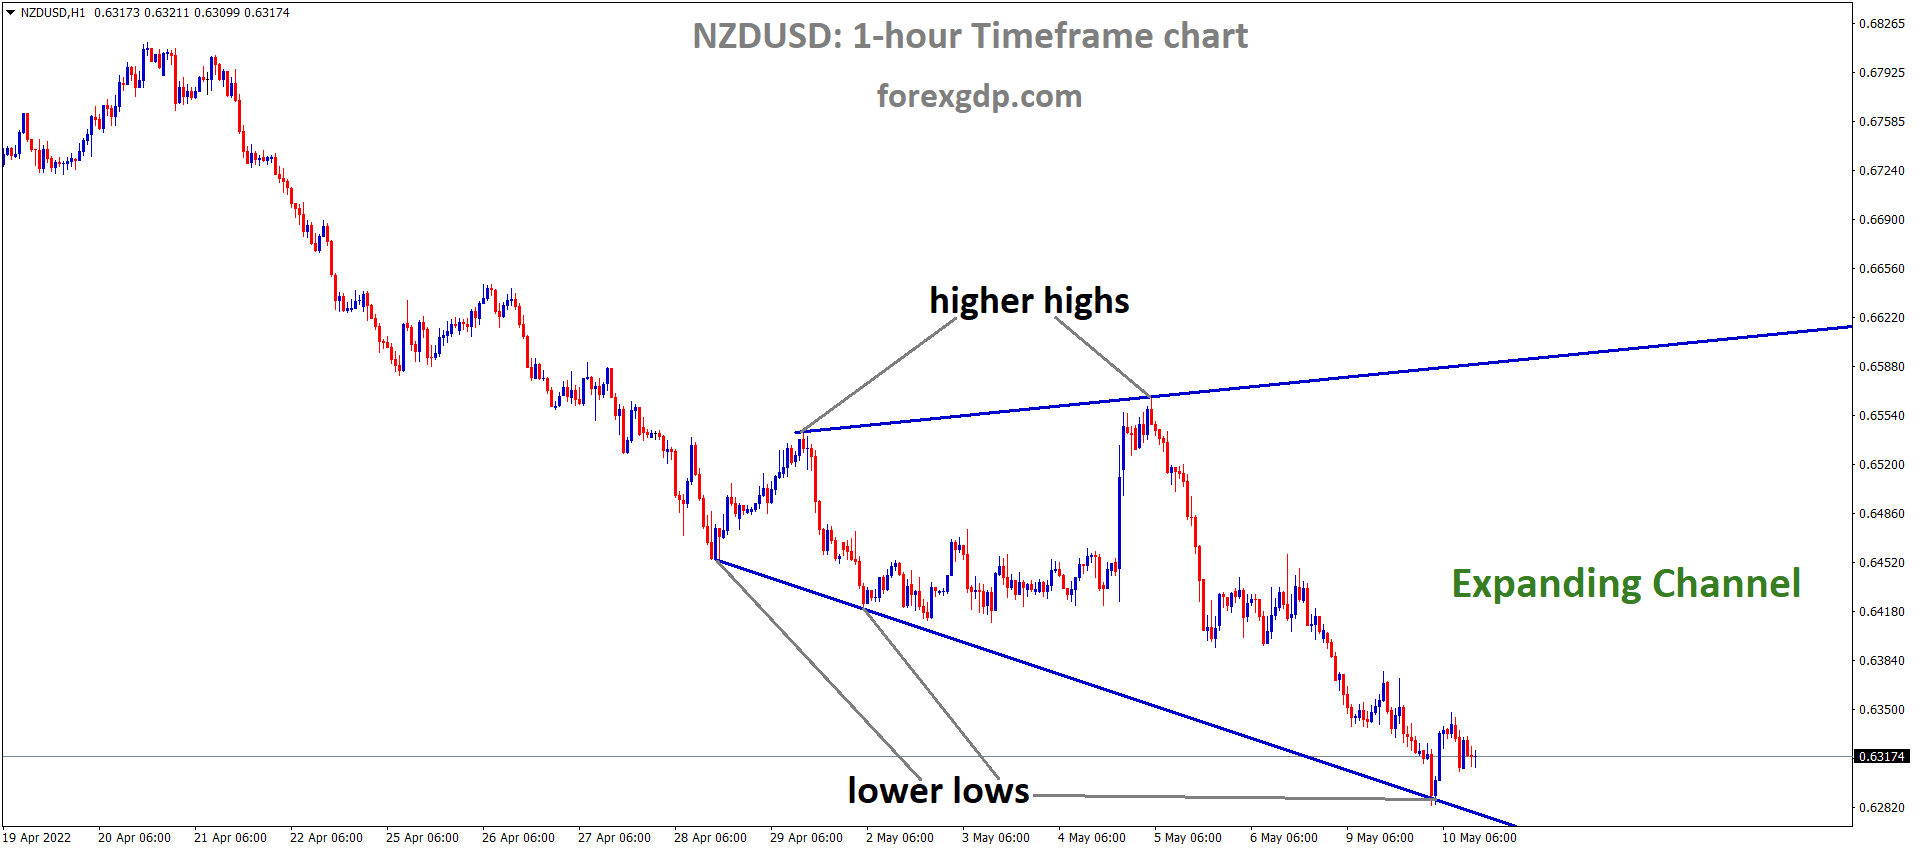 NZDUSD H1 Time Frame Analysis Market is moving in an Expanding channel Pattern and the Market has rebounded from the lower low area of the Channel